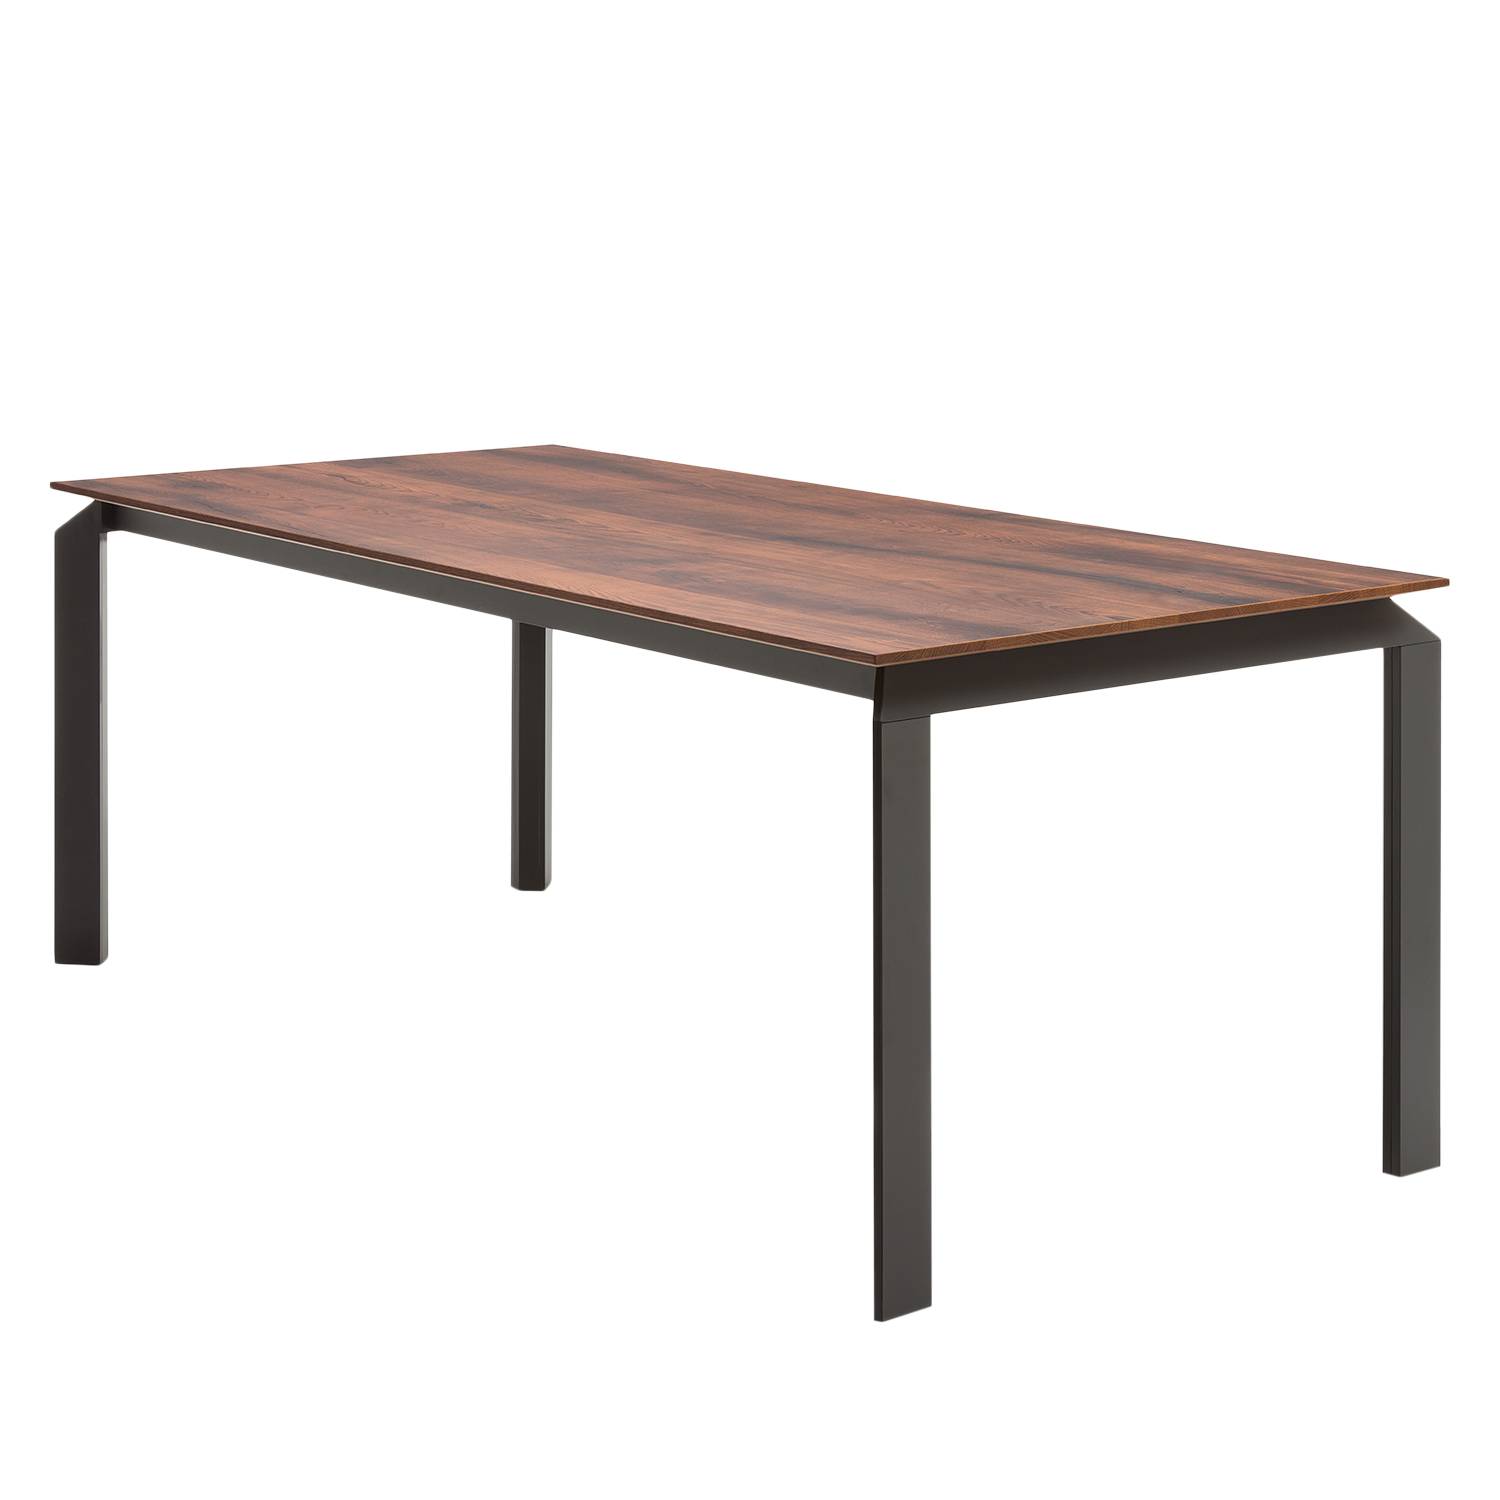 Image of Table basse Misano 000000001000188637